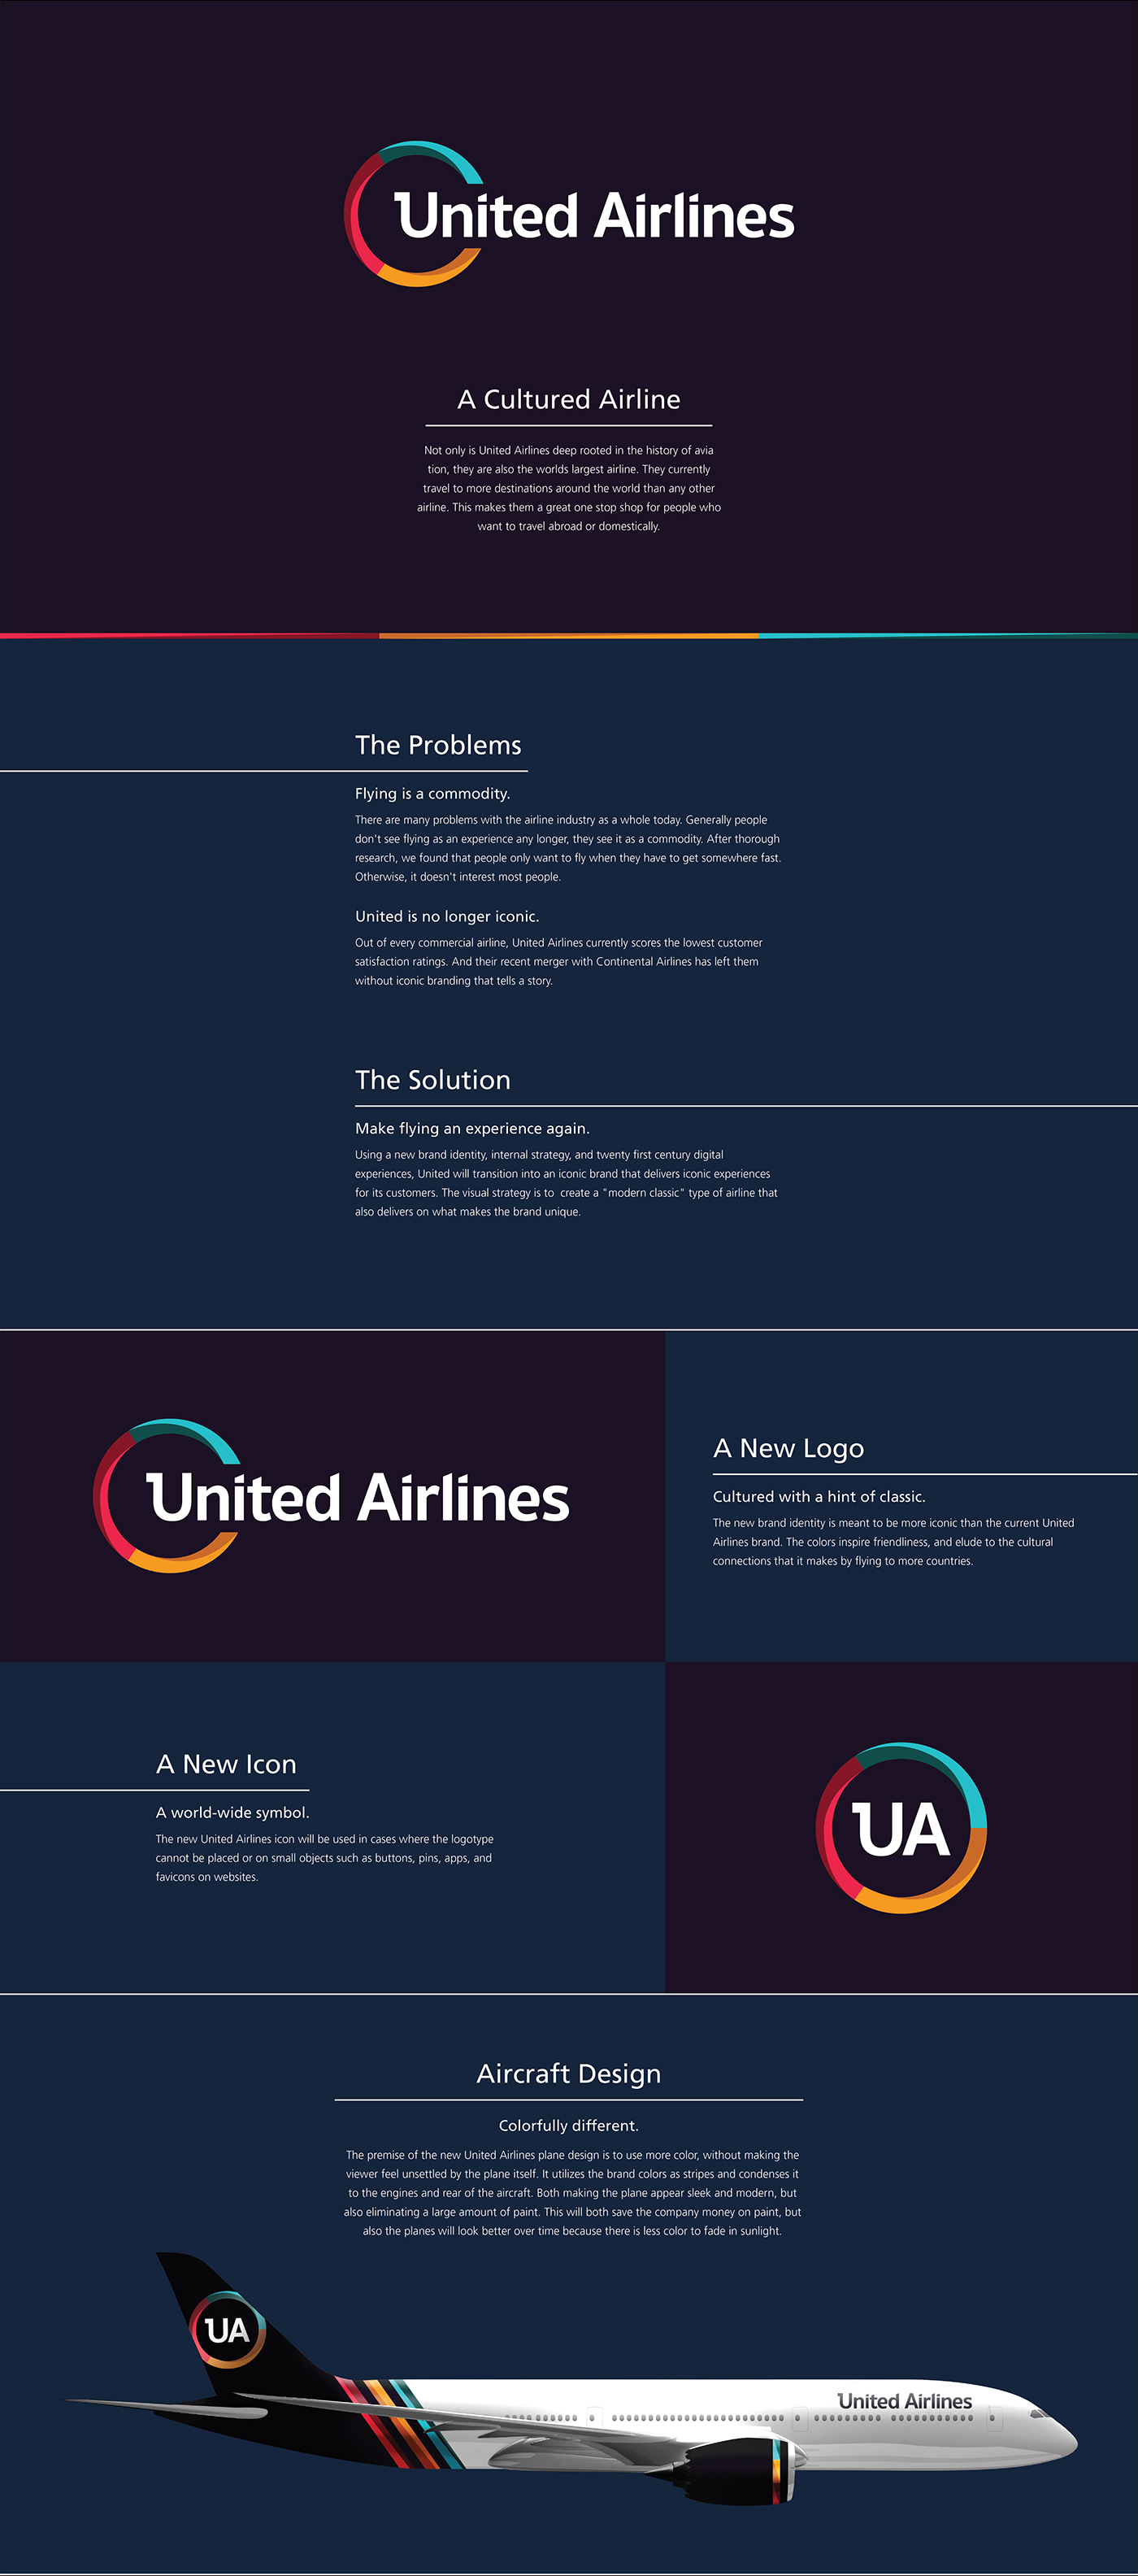 united Airlines Flying world airline culture abroad International Jet airplane Website app digital Experience design